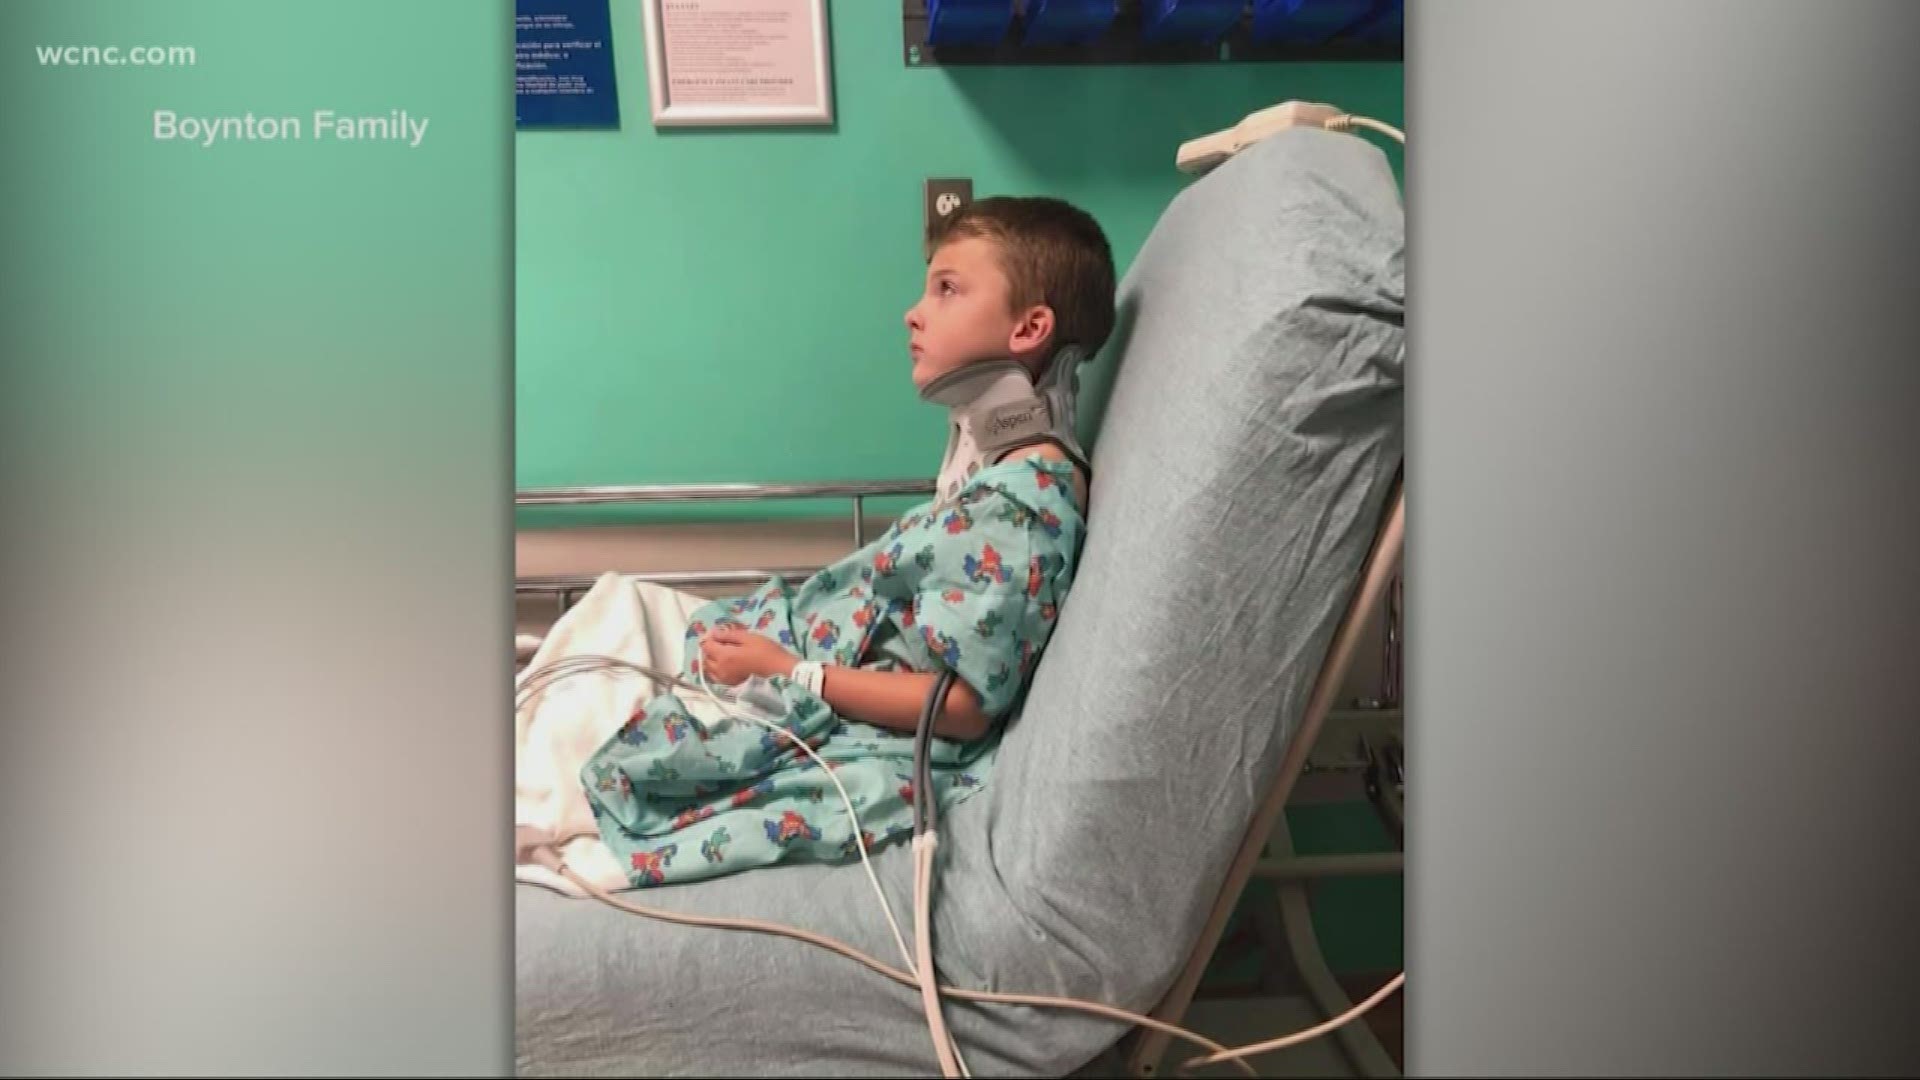 Two bullies, who reportedly beat an eight-year-old boy unconscious at school, will not face charges. Under Texas law, any child under 10 can not be charged.